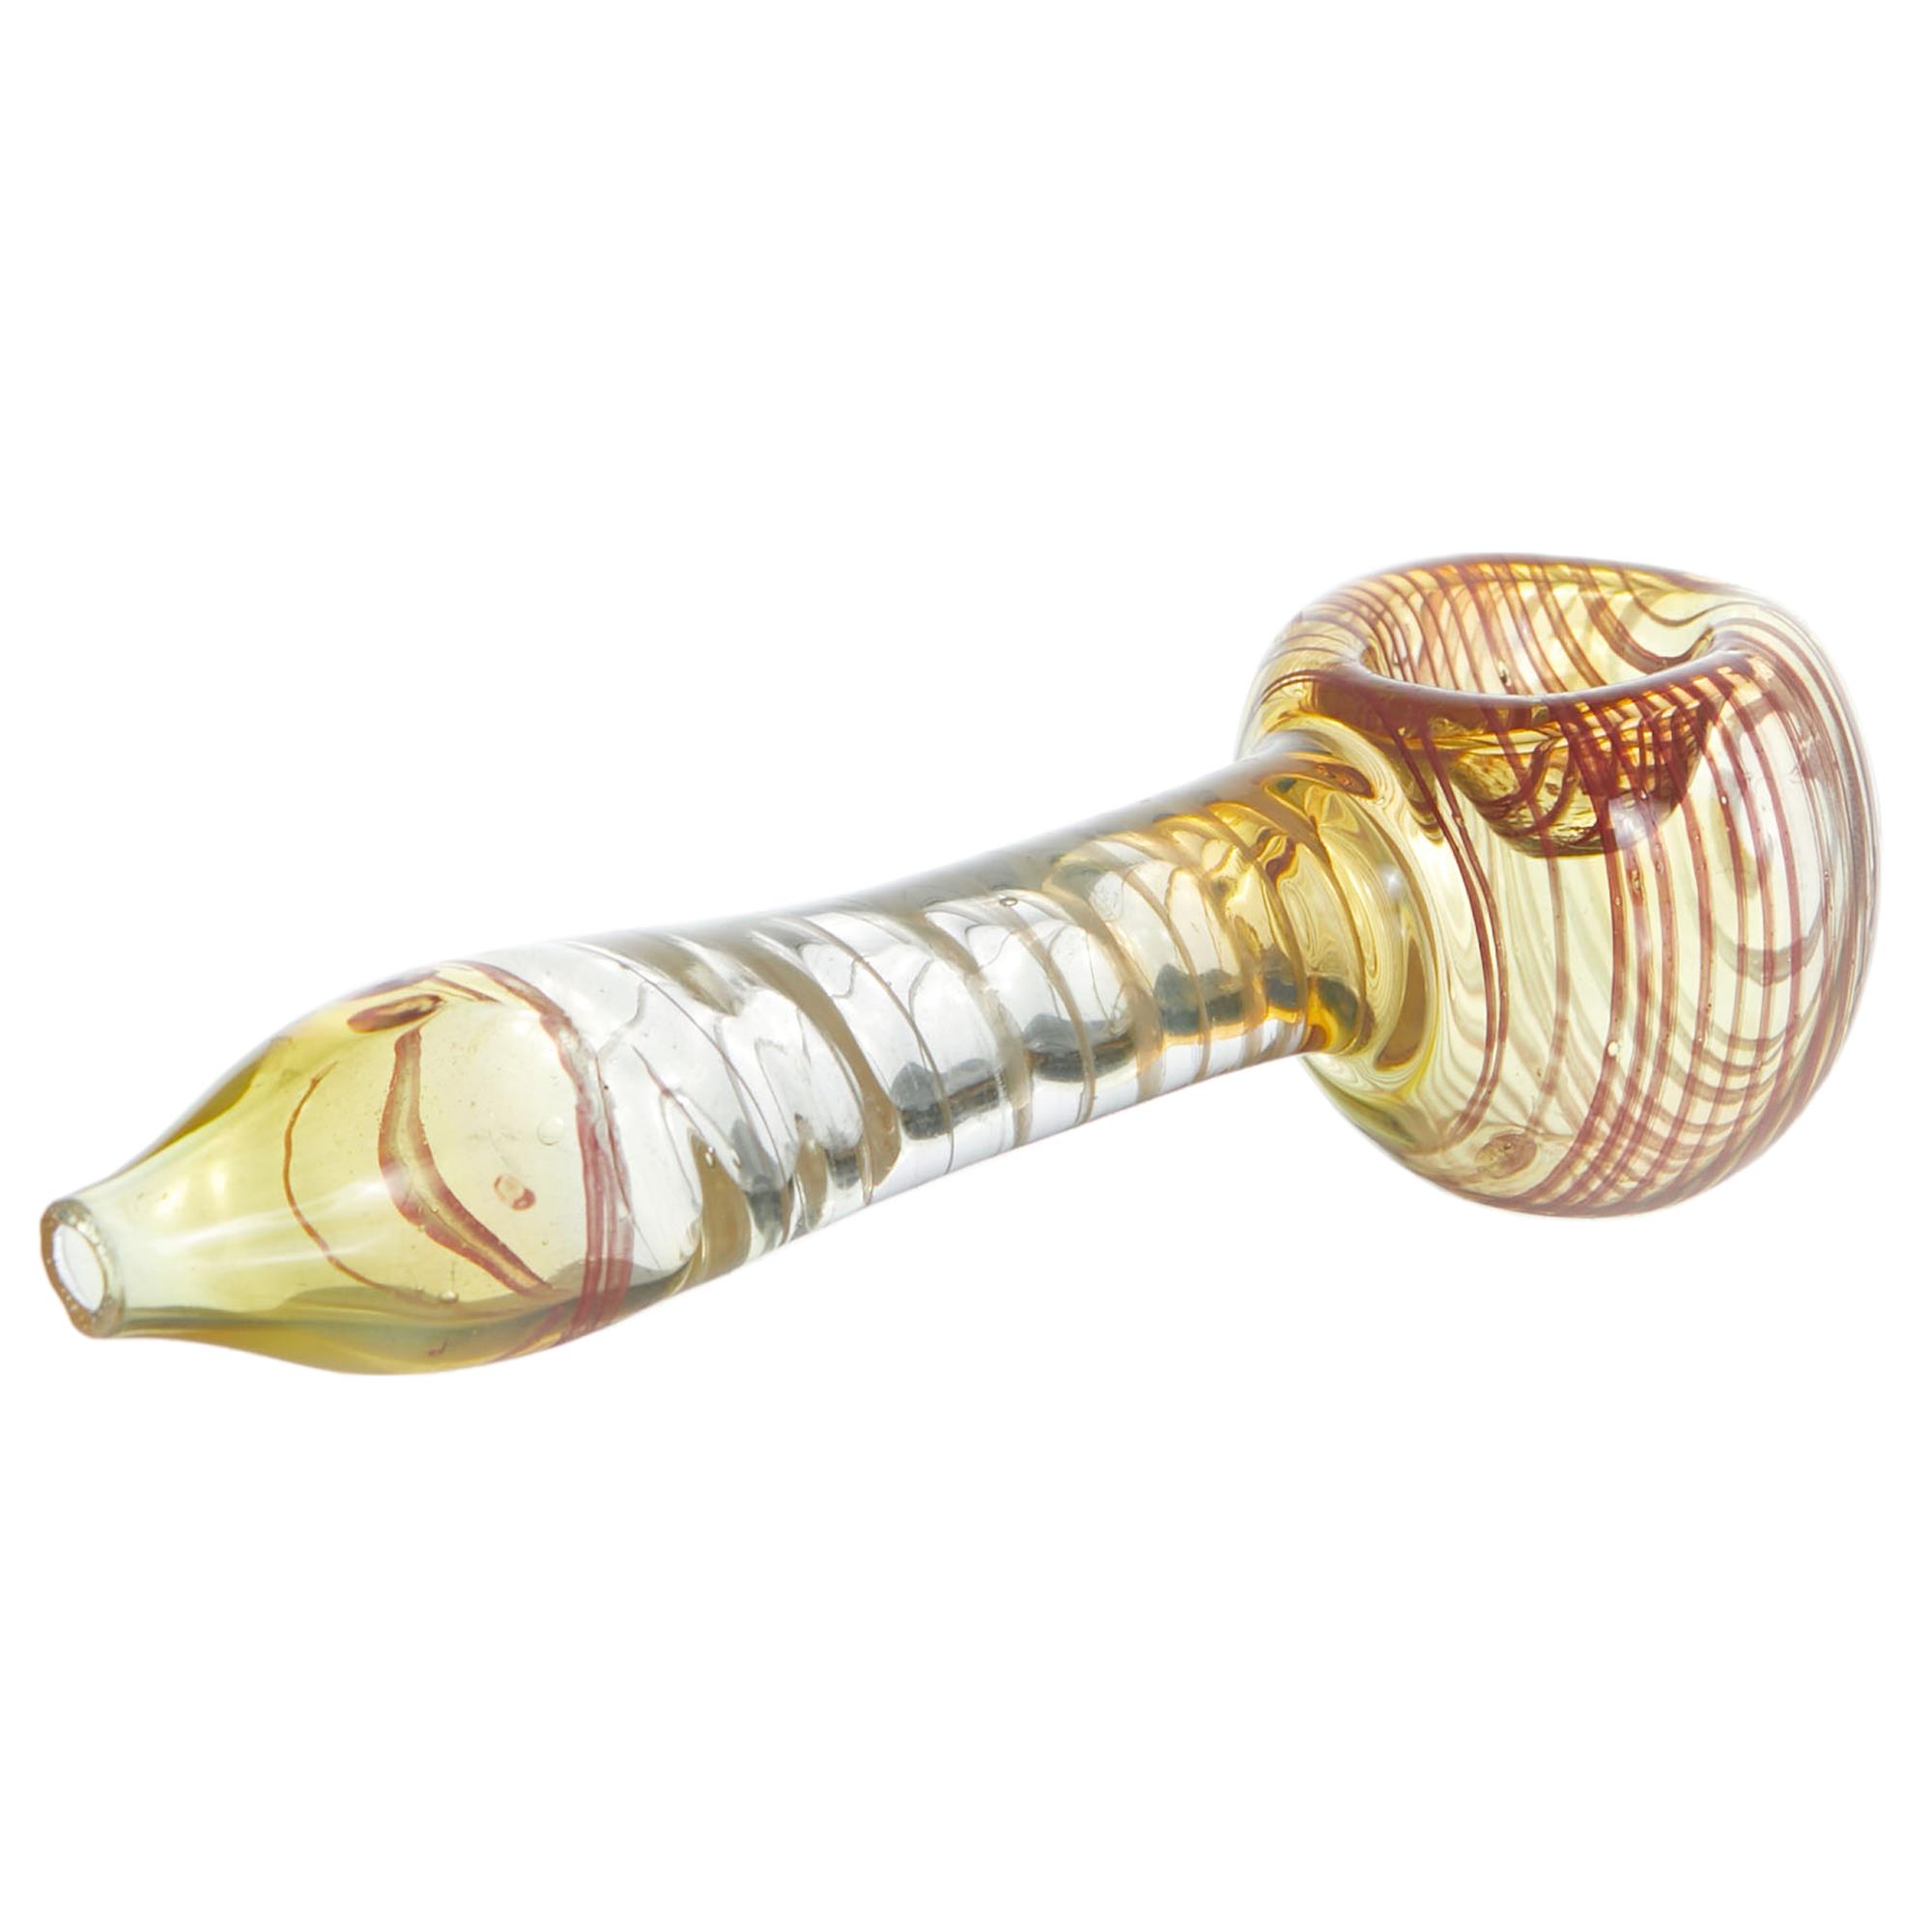 EXTRA DOPE GLASS SPOON HAND PIPE